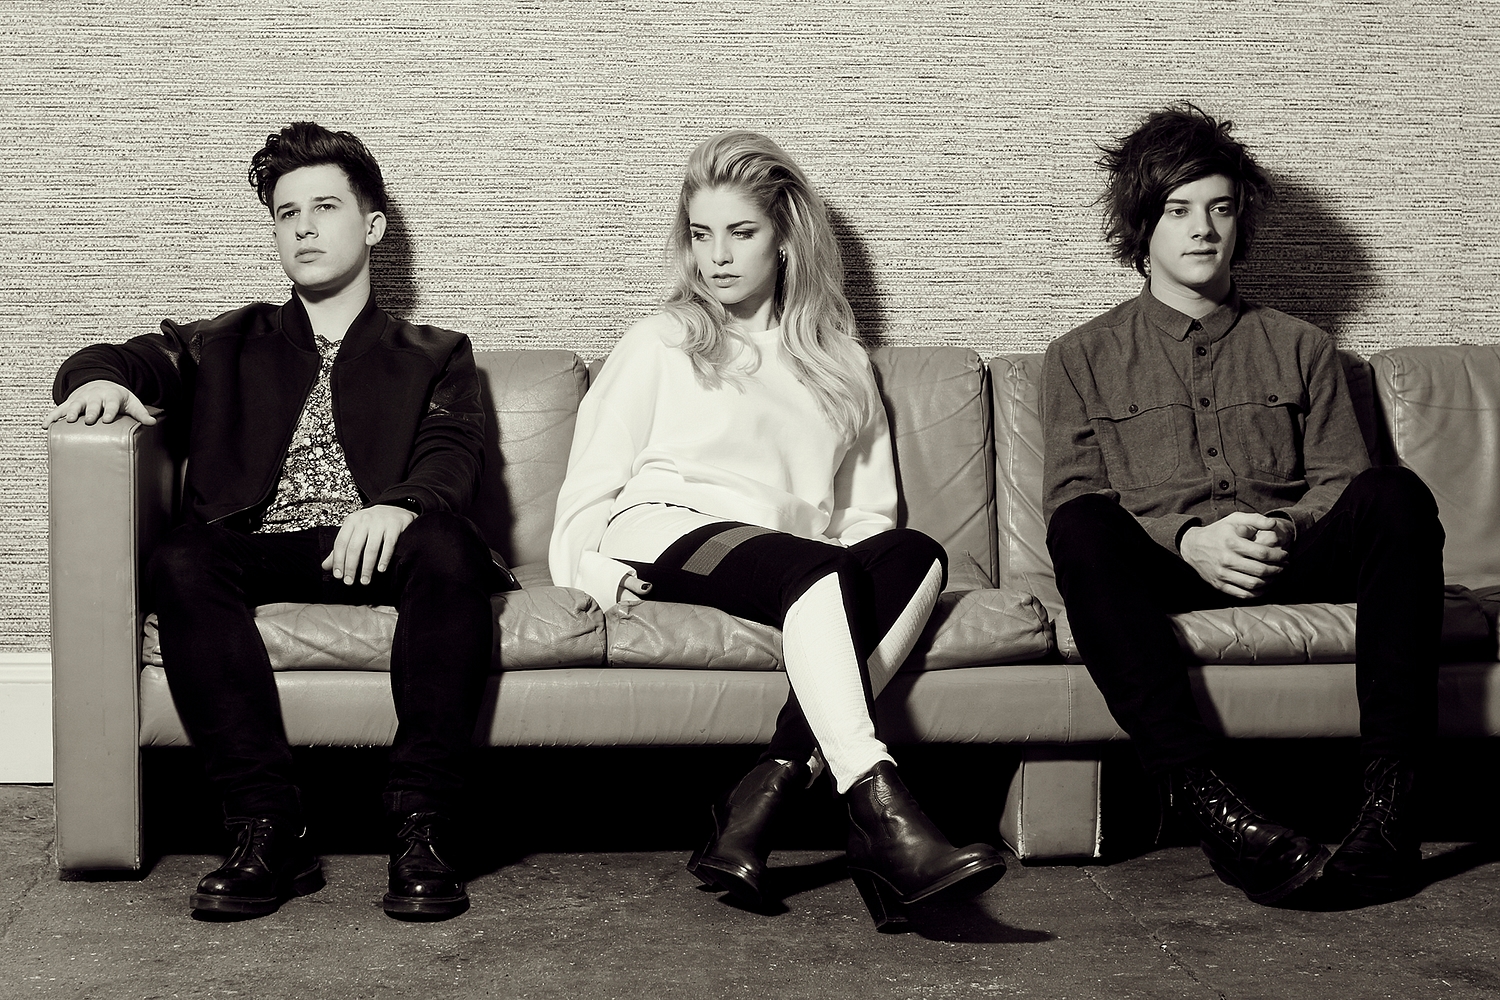 London Grammar’s new video encourages you to see the ‘Big Picture’